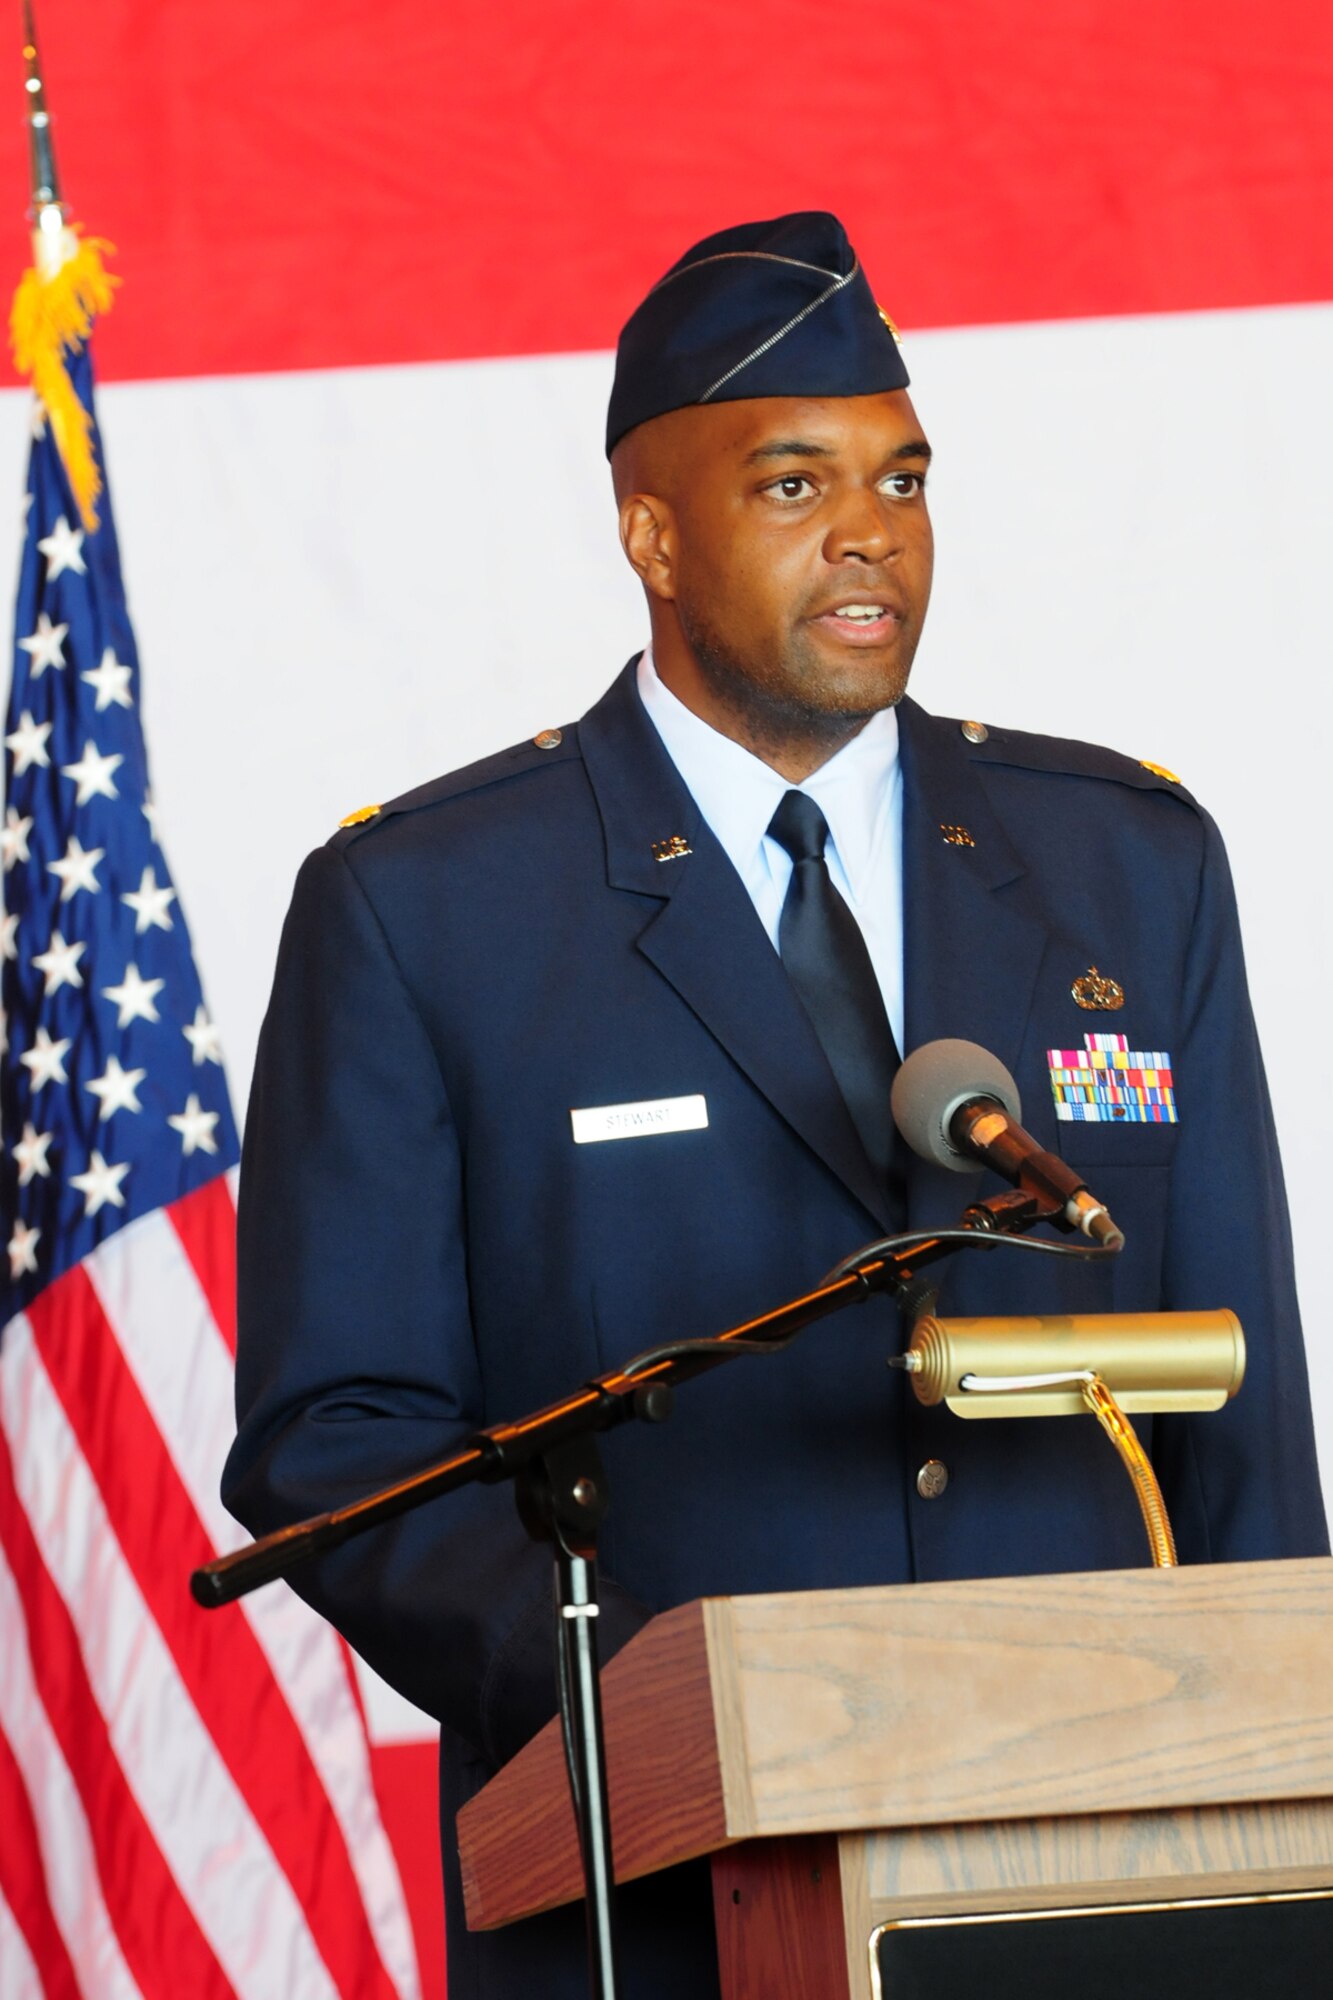 Major Louis G. Stewart accepted command of the 552 Maintenance Squadron in a June 29 ceremony.  He informed his squadron that he seeks to establish a prideful culture in the maintenance squadron and reminded them of the challenges that remain ahead.  (Photo by Kelly White) 